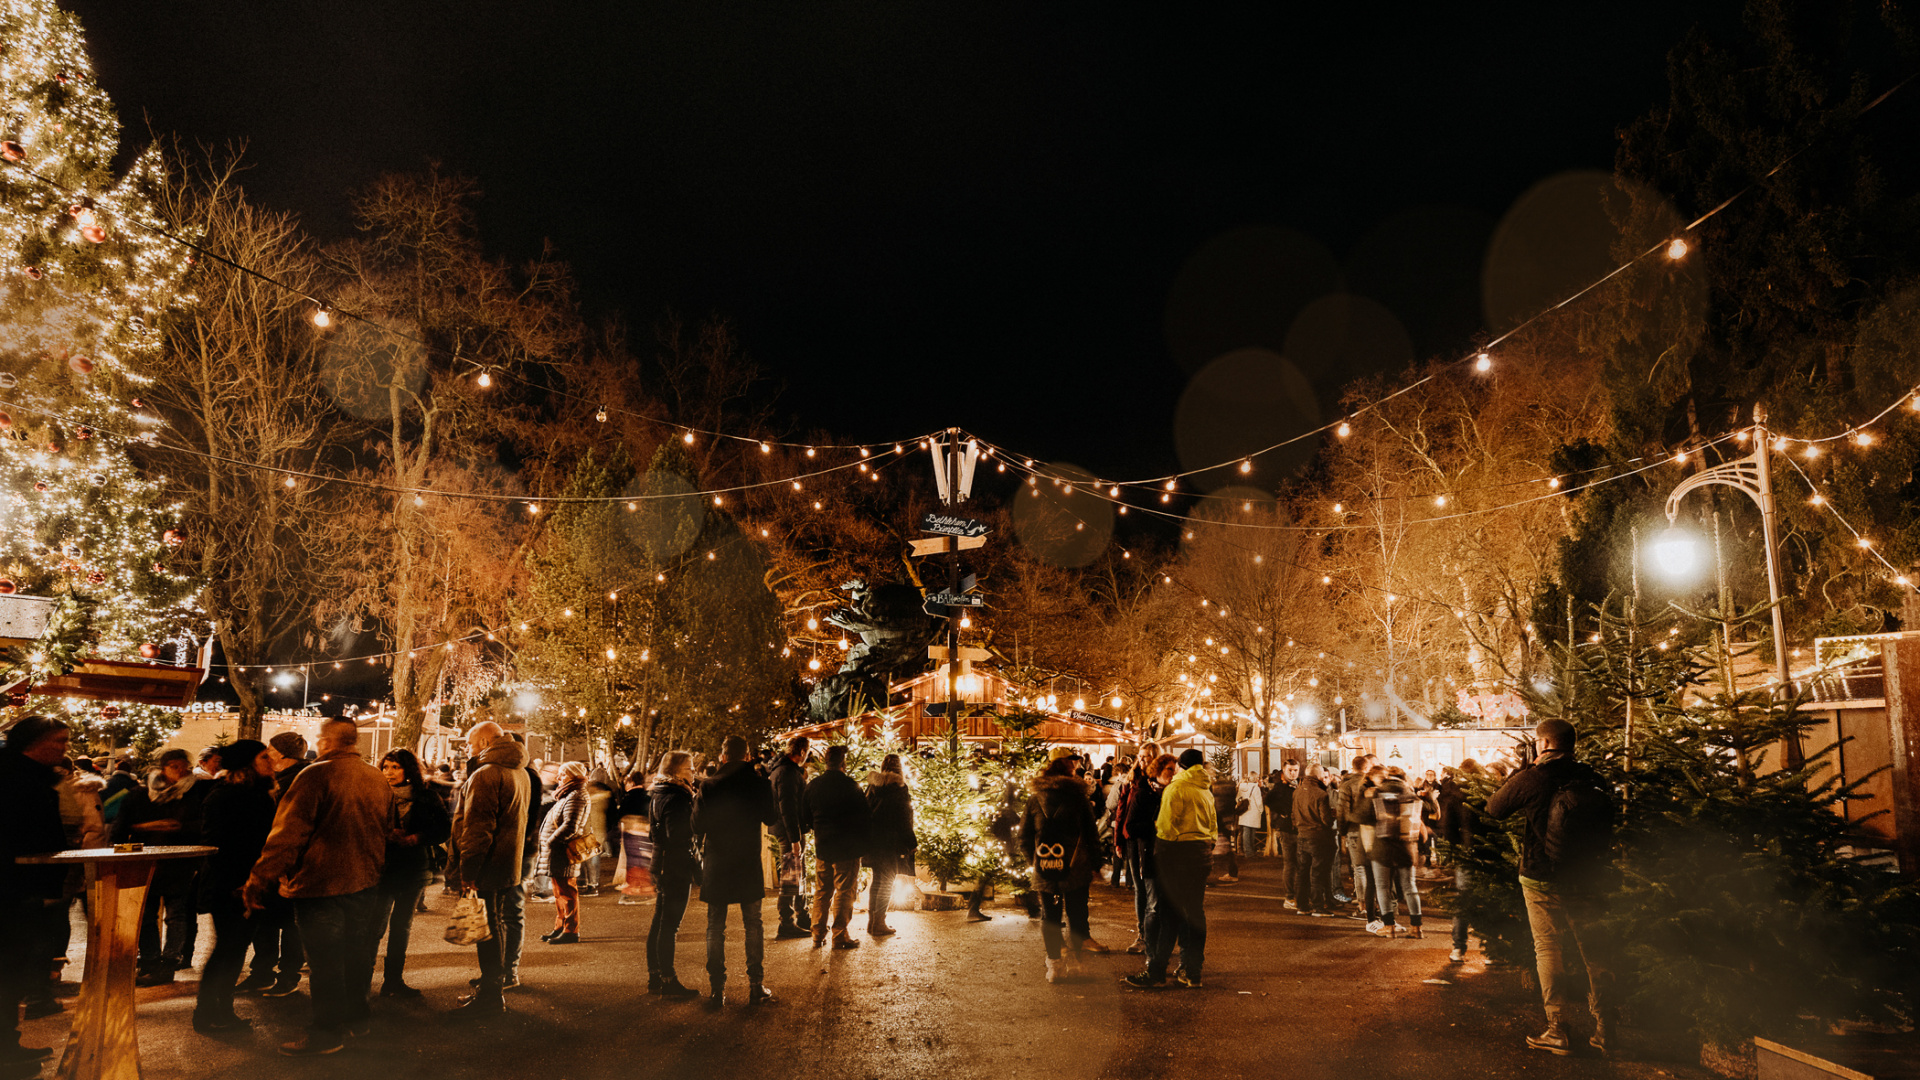 Sternchenmarkt Christmas market is one of the most magical Christmas markets in Düsseldorf